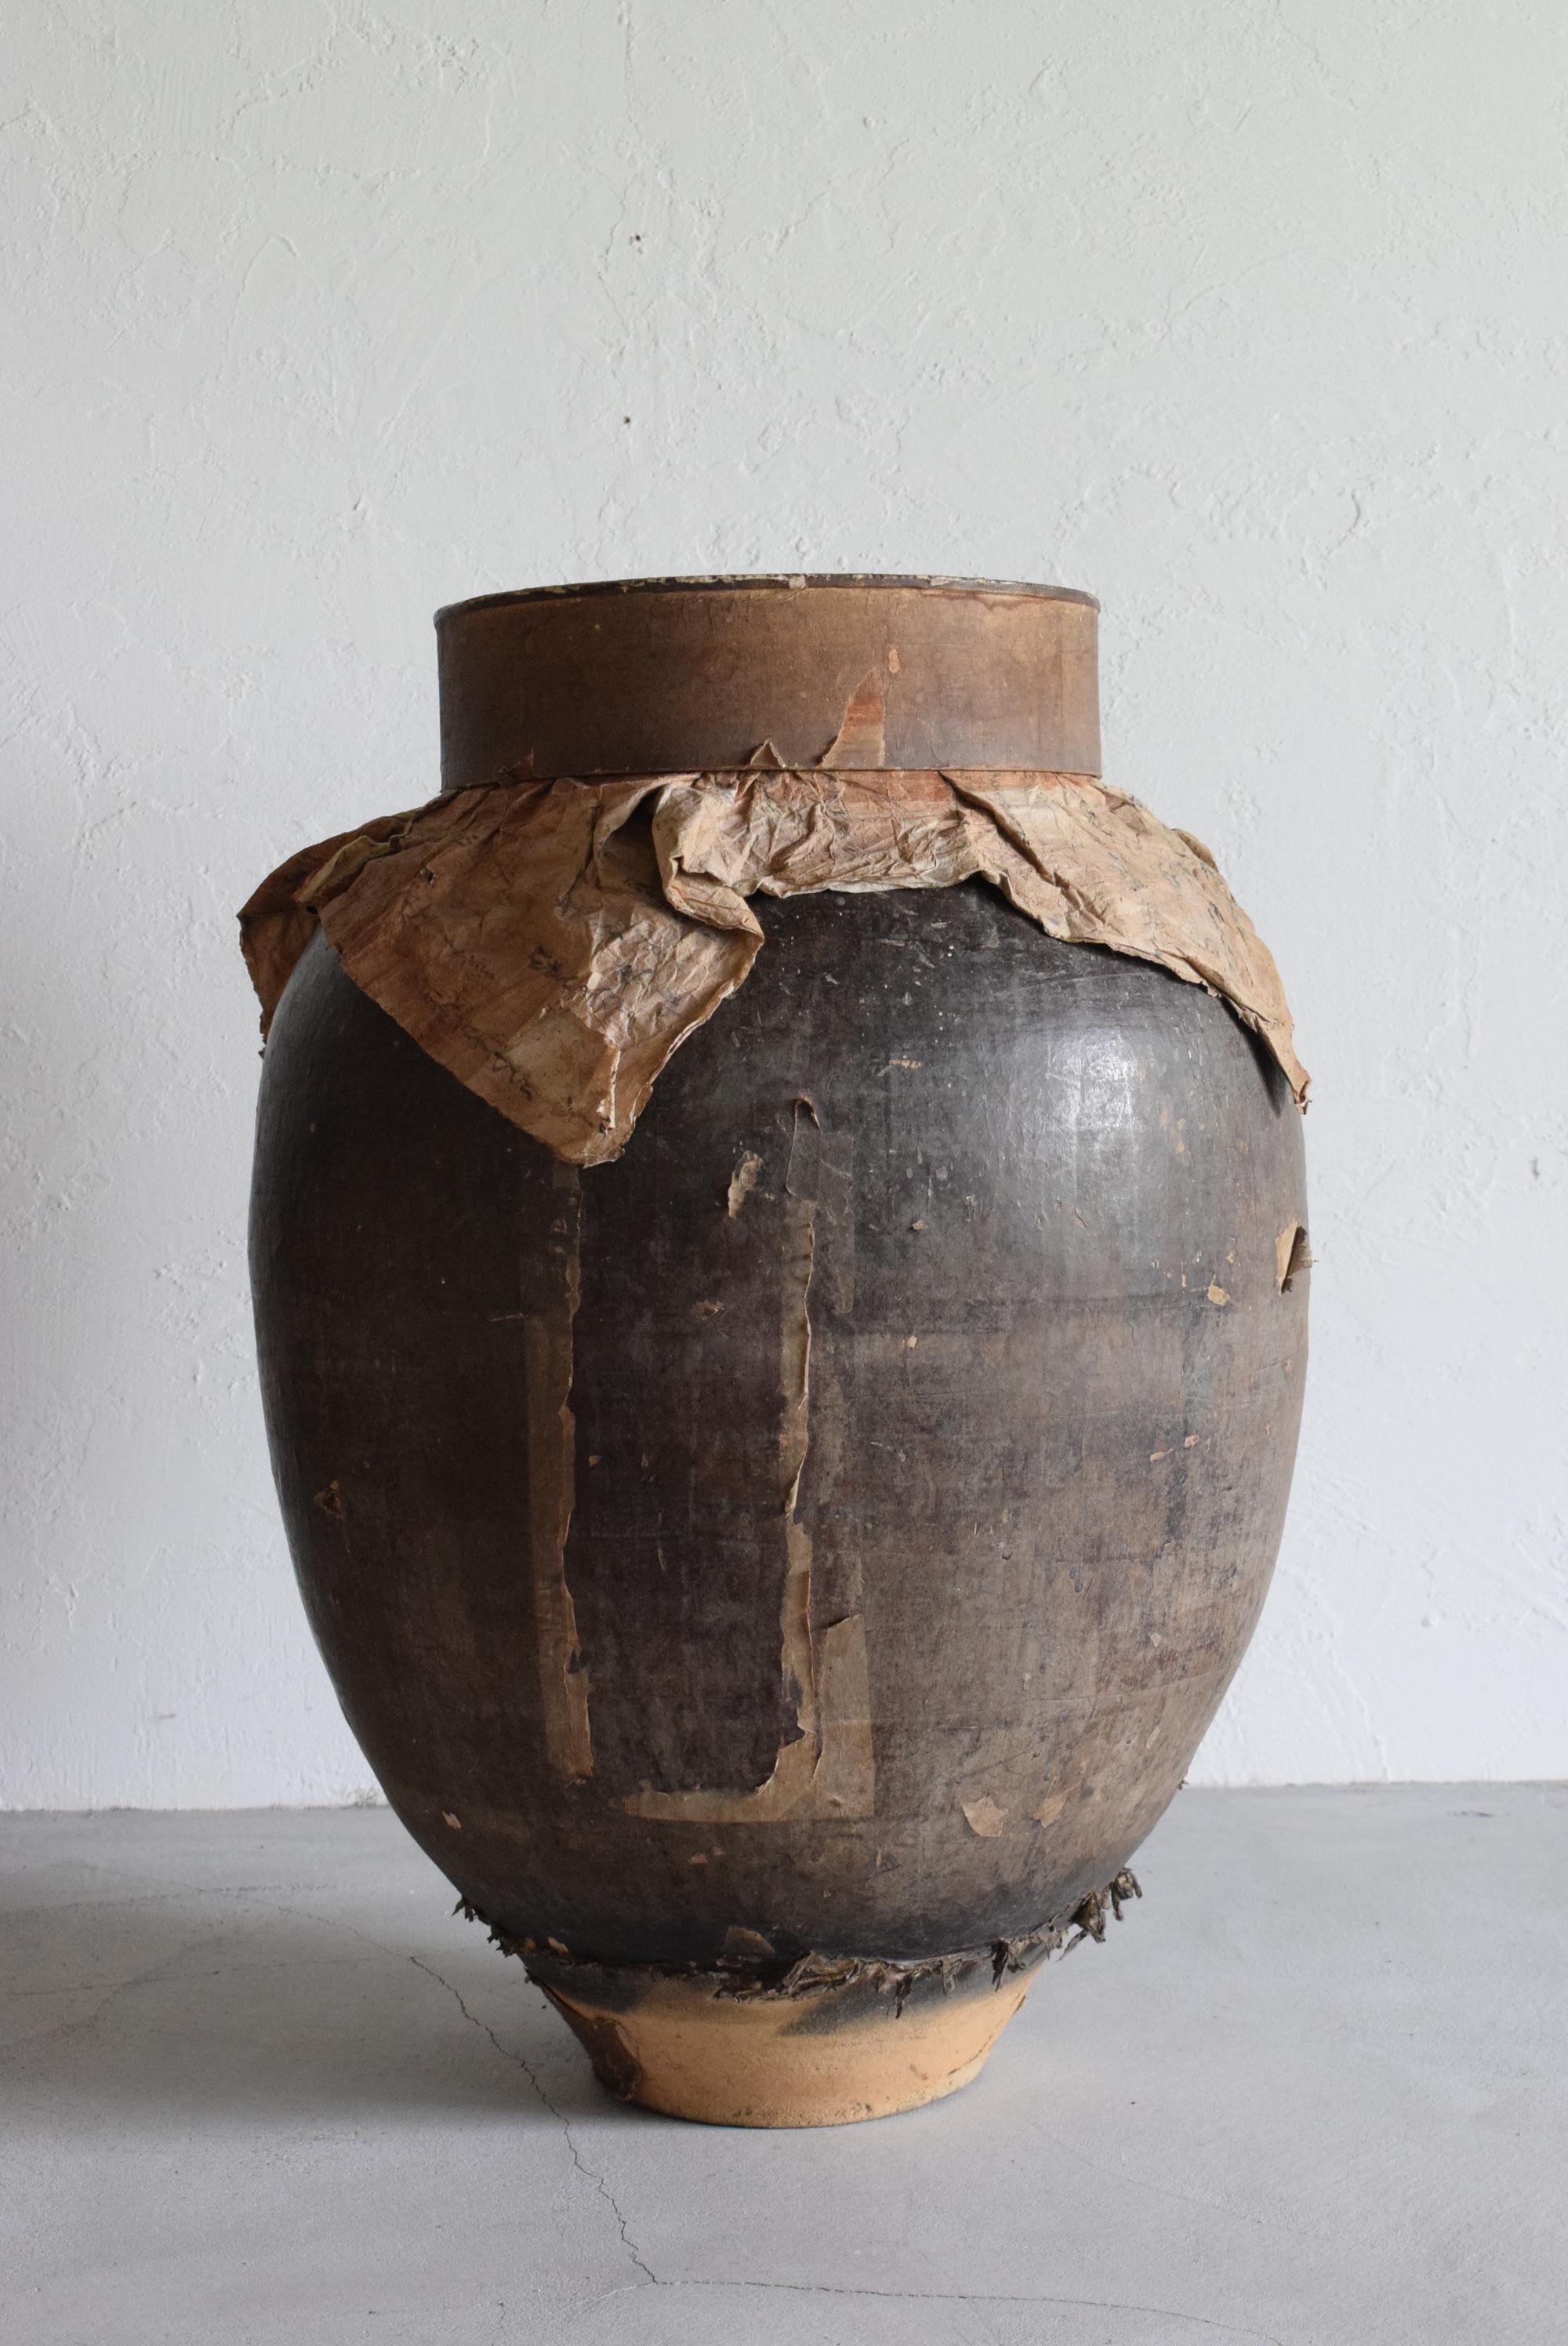 This is a large Japanese pottery.
It is from the Meiji period.
The entire pottery is covered with paper.

This large vase was used to transport and store tea leaves.
It is covered with paper to protect it from moisture.
 